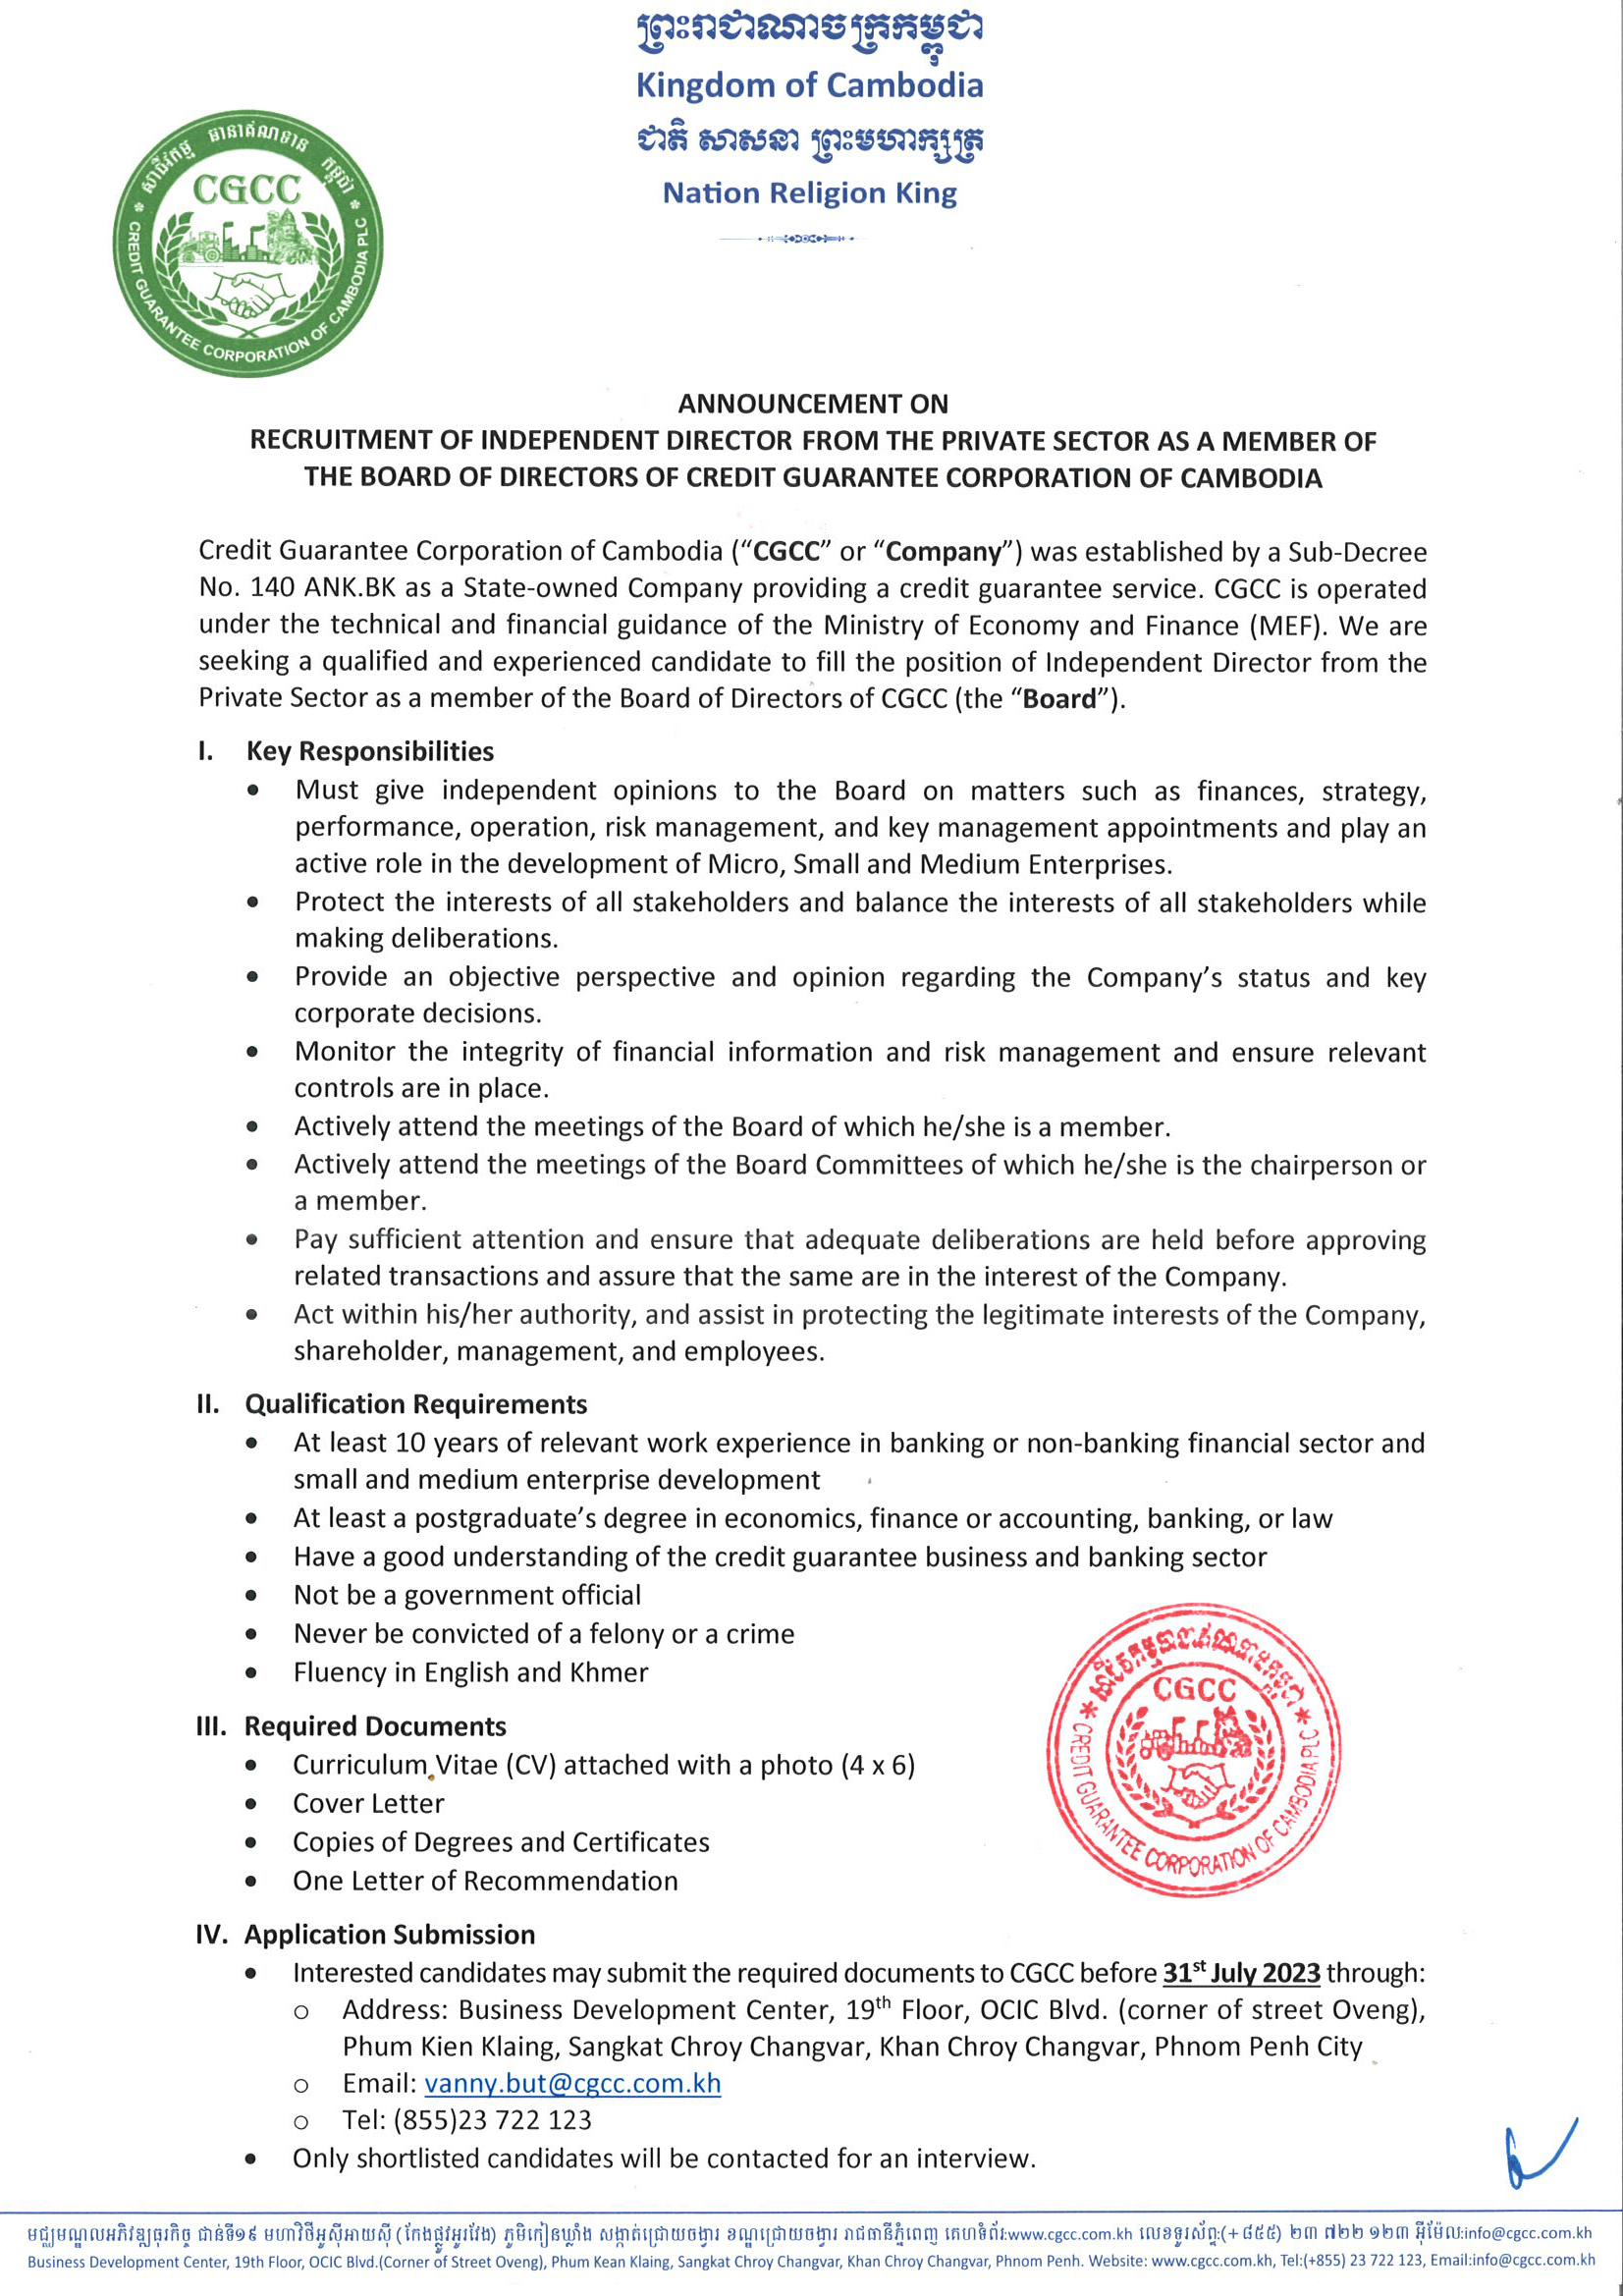 Job Vacancy with CGCC-INDEPENDENT DIRECTOR FROM THE PRIVATE SECTOR AS A MEMBER OF THE BOARD OF DIRECTORS